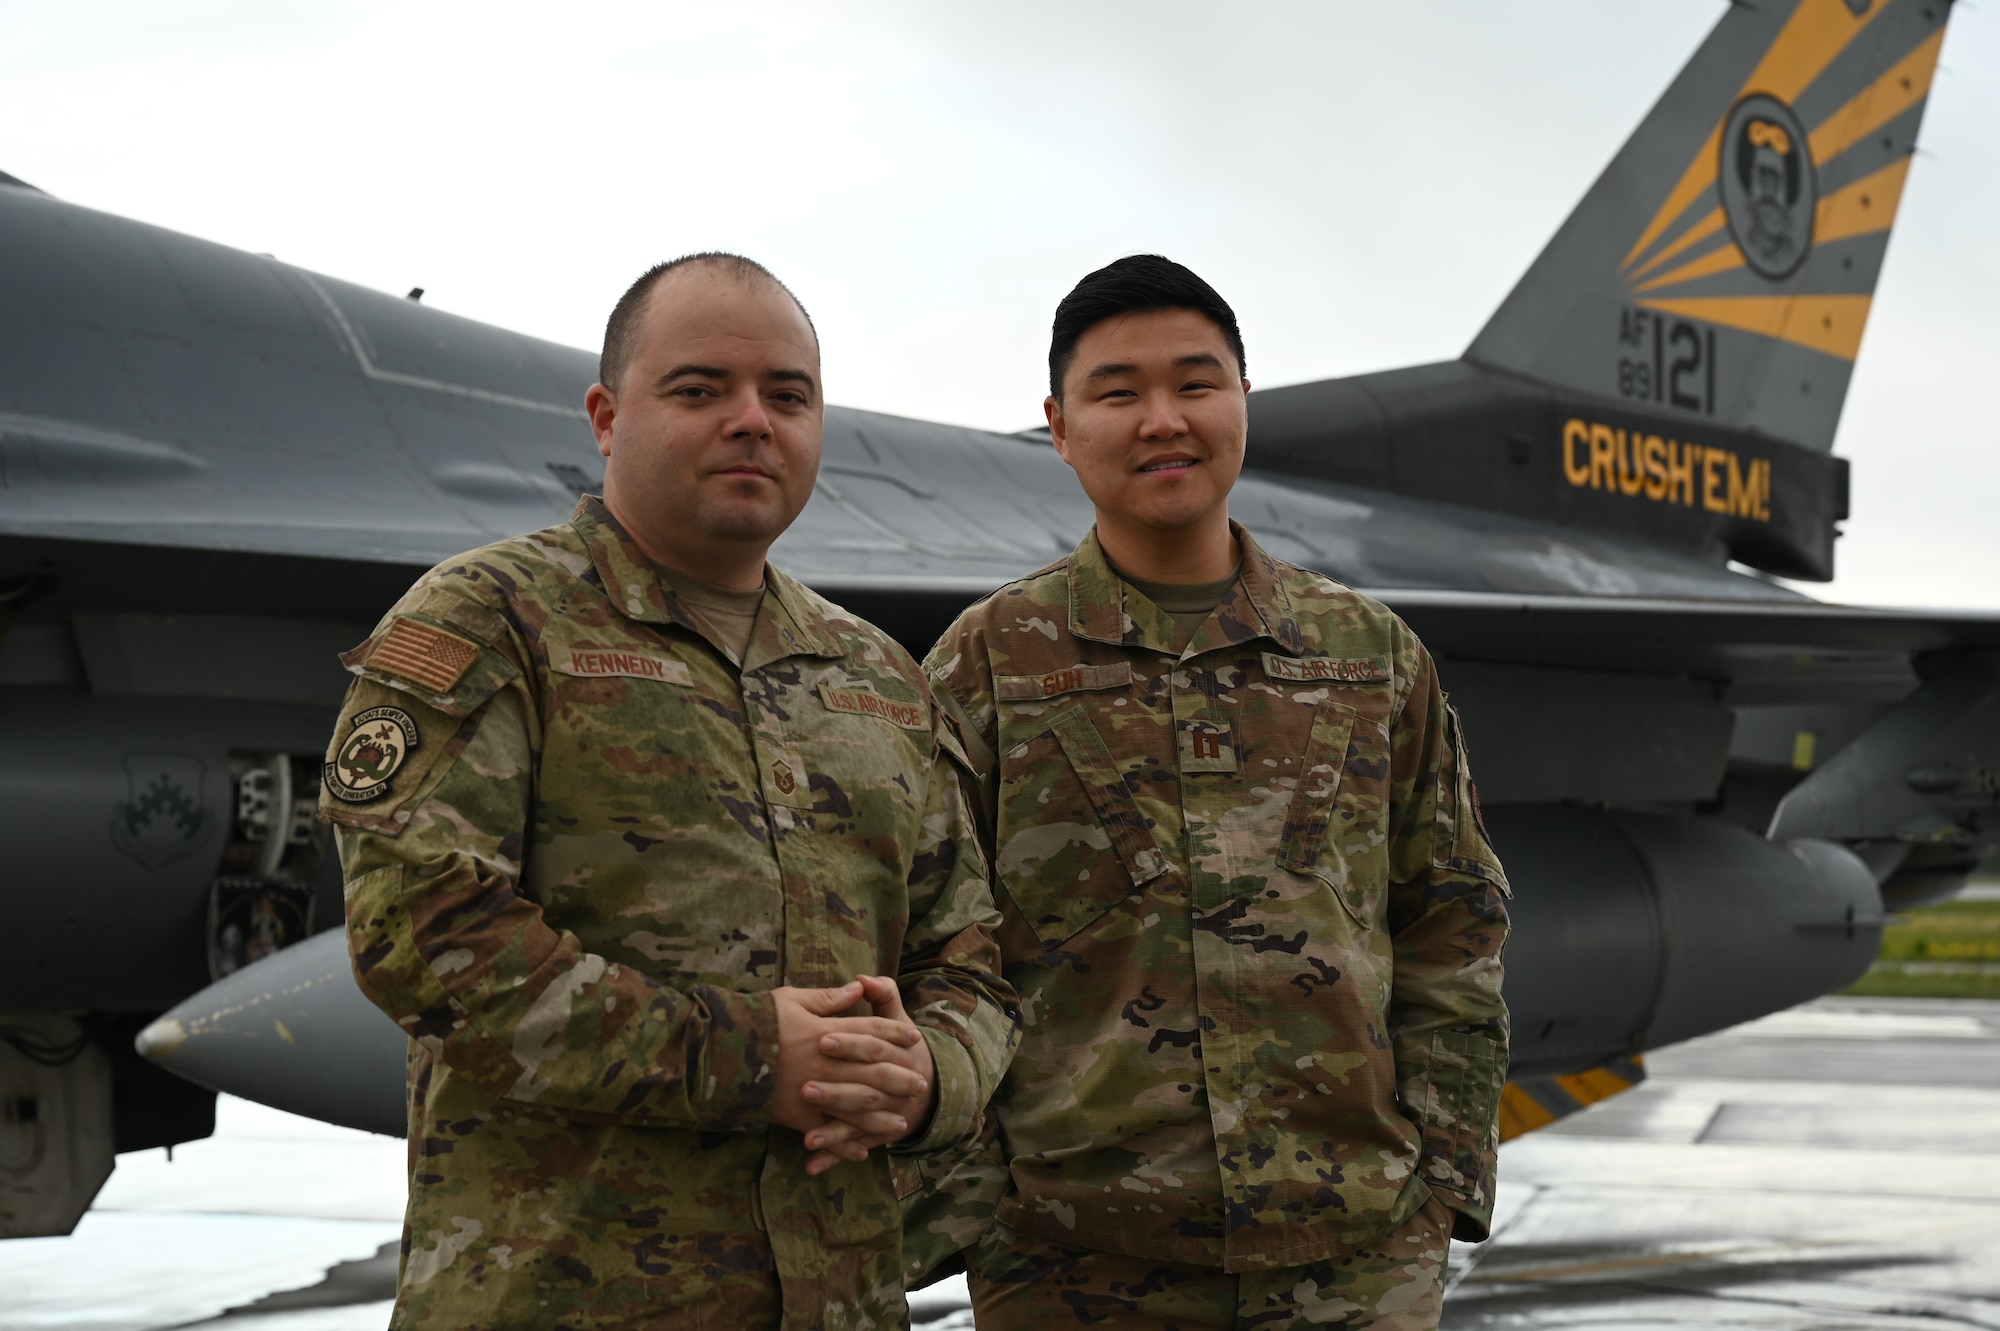 U.S. Air Force Master Sgt. Carleton Kennedy, left, 80th Fighter Generation Squadron production supervisor, and Capt. Sung Woo Suh, 80th FGS Director of Operations, pose for a photo in front of an F-16 Fighting Falcon assigned to the 80th Fighter Squadron at Eielson Air Force Base Alaska, June 13, 2023. While deployed to Eielson in support of RED FLAG-Alaska, Suh and Kennedy were recognized for saving an infant, father and dog from drowning and hypothermia when their kayak capsized in Chena Lake Recreation Area, Alaska on June 3, 2023.(U.S. Air Force photo by Airman Carson Jeney)